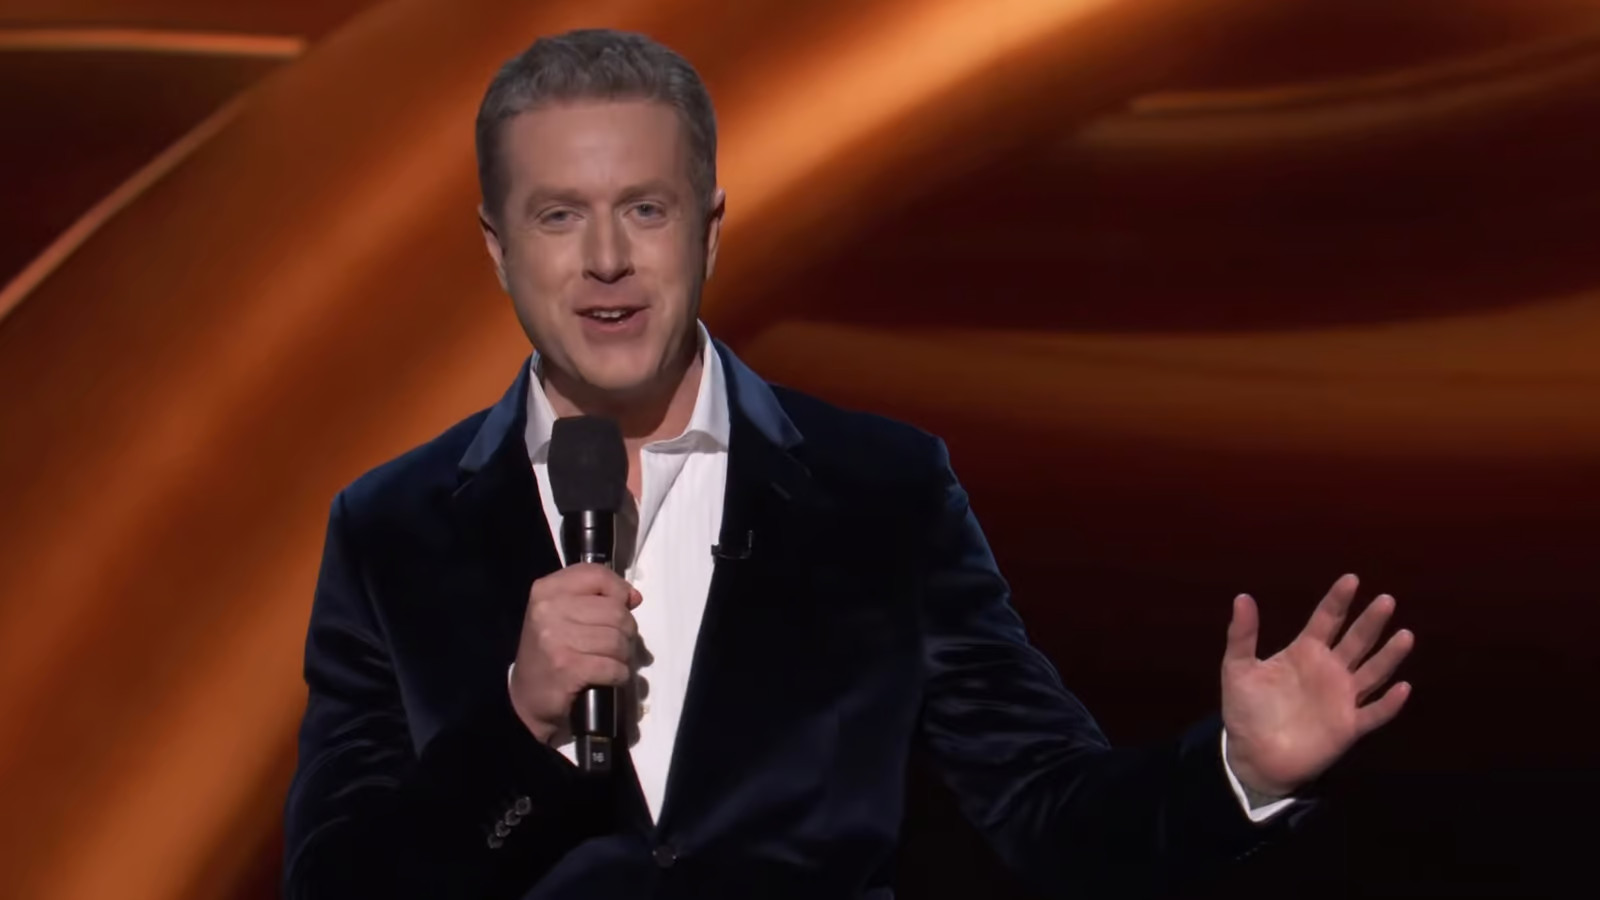 Check out The Game Awards 2020, event details, Geoff Keighley, pre-show,  host, presenter, Xbox. Check out the latest on video games, consoles,  esports, news at India Today Gaming.